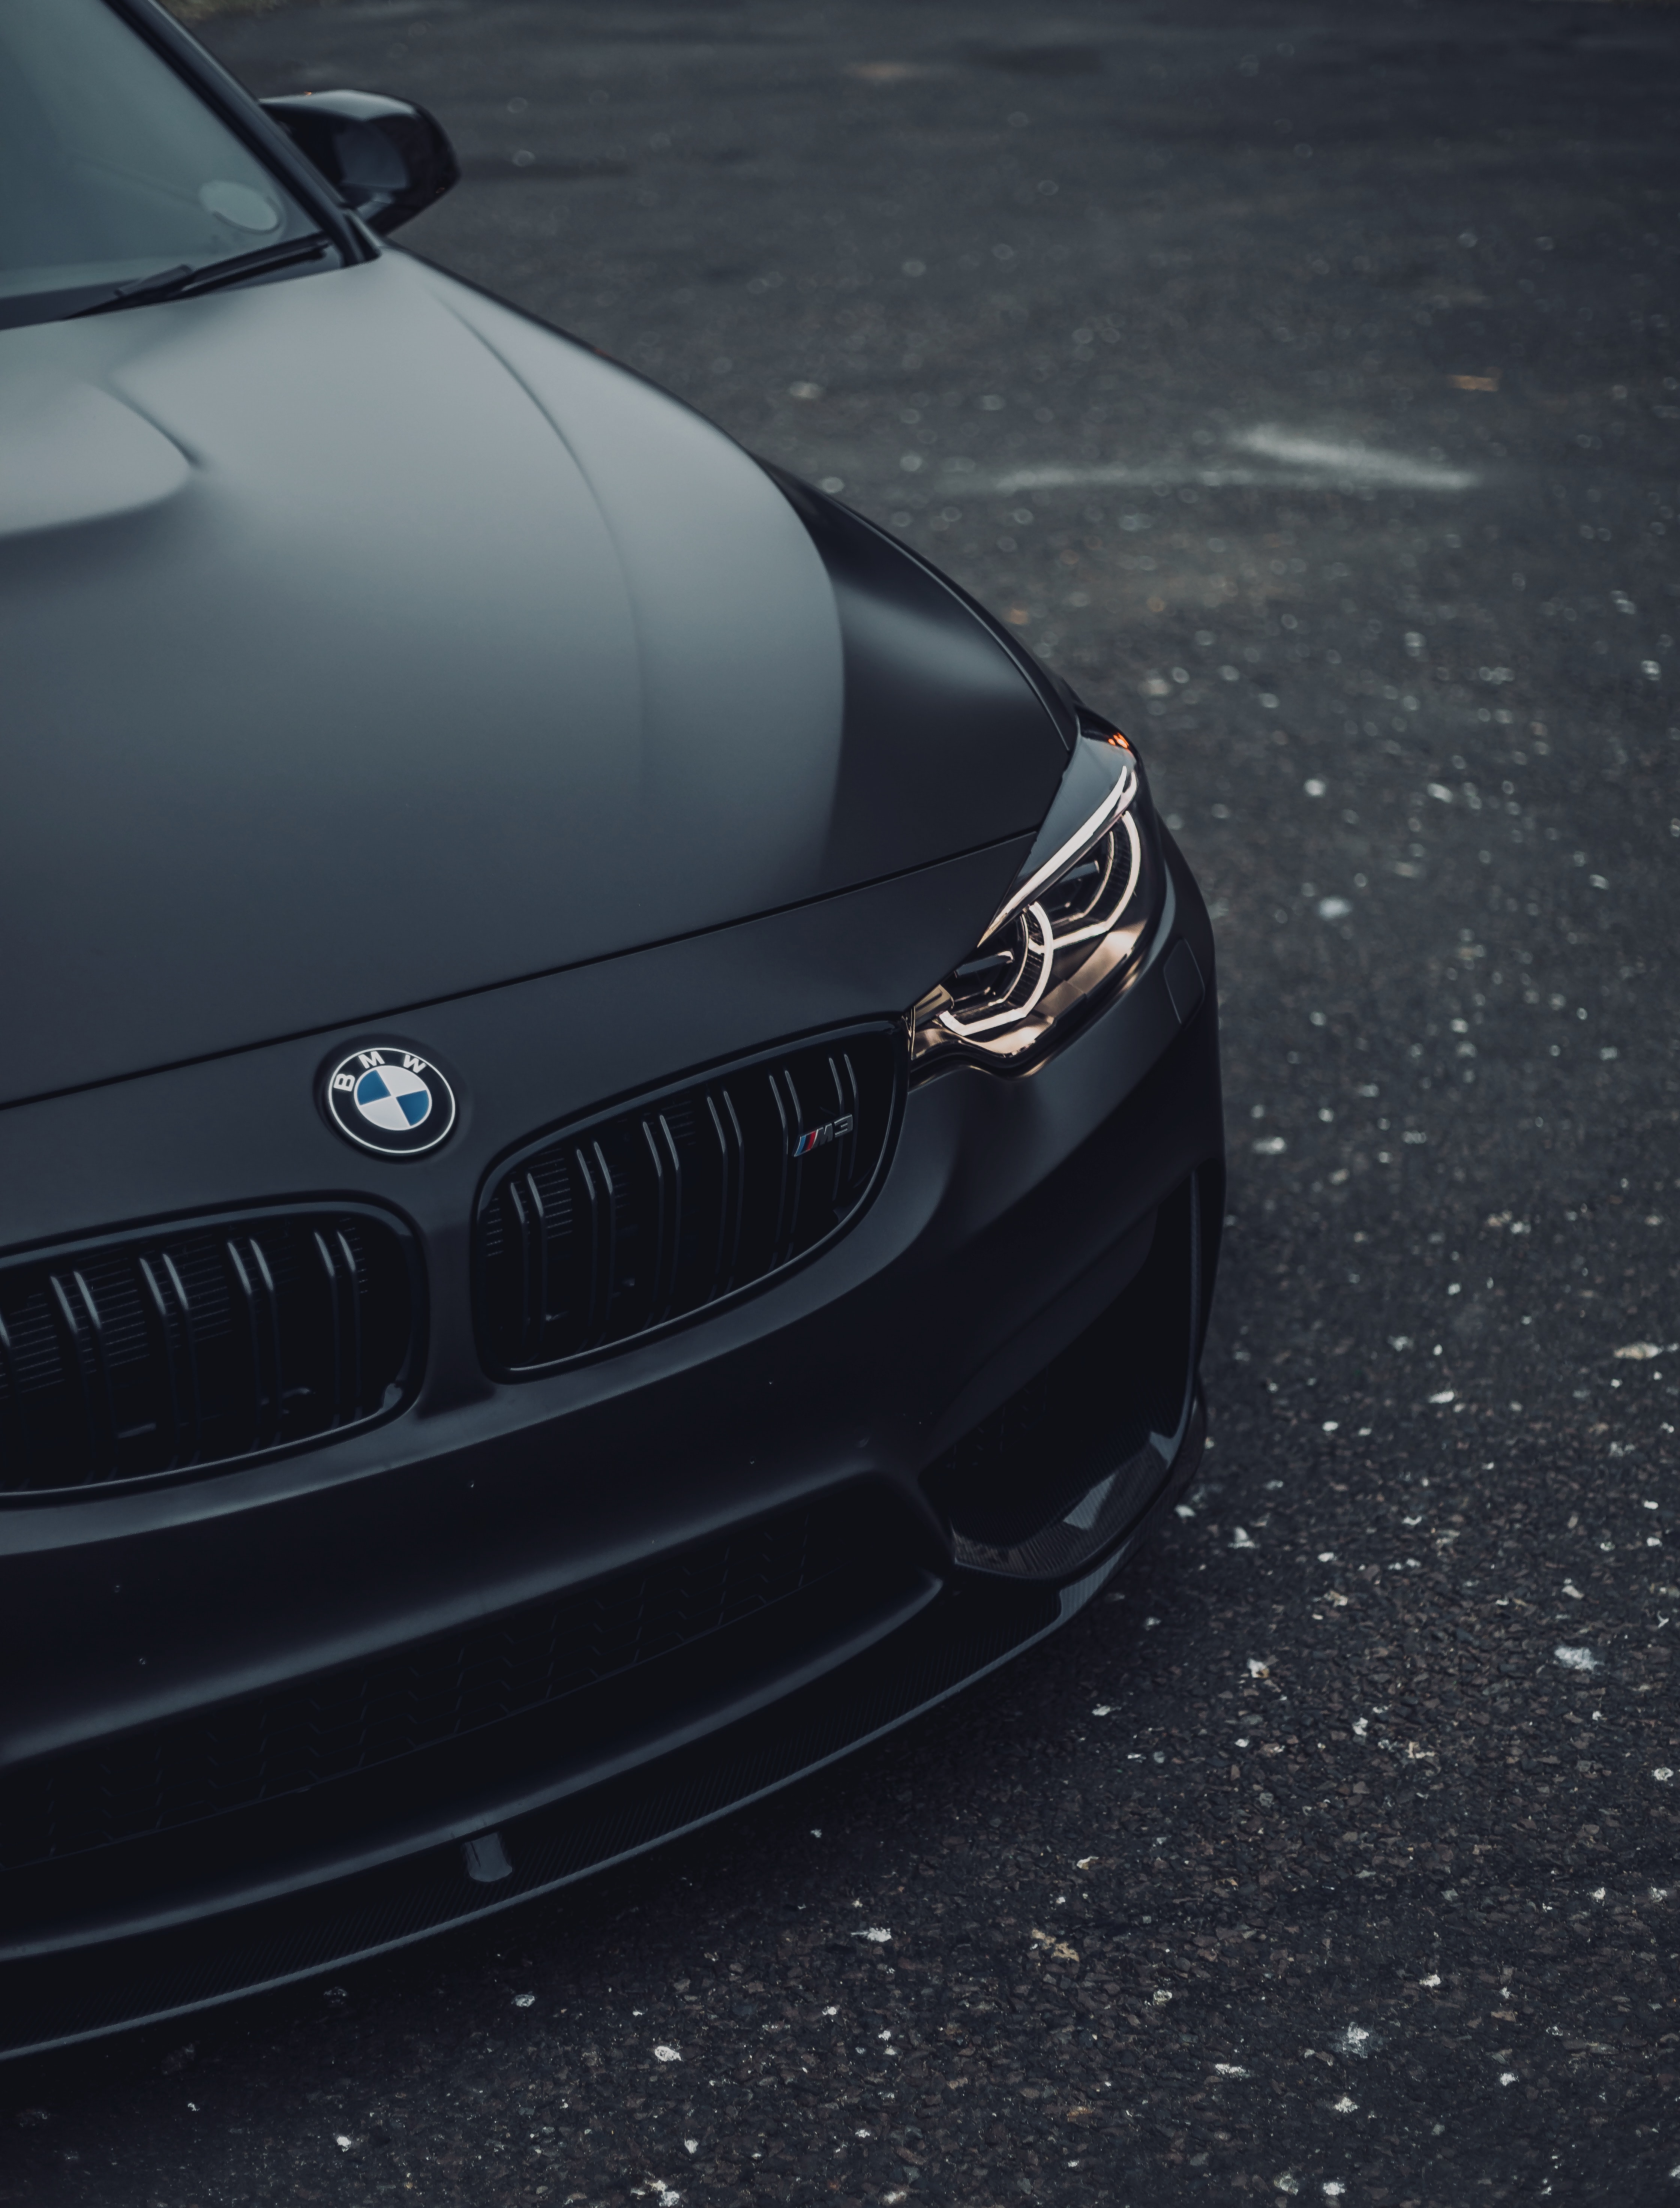 134994 free download Black wallpapers for phone, bmw m3, bmw, cars, headlight Black images and screensavers for mobile